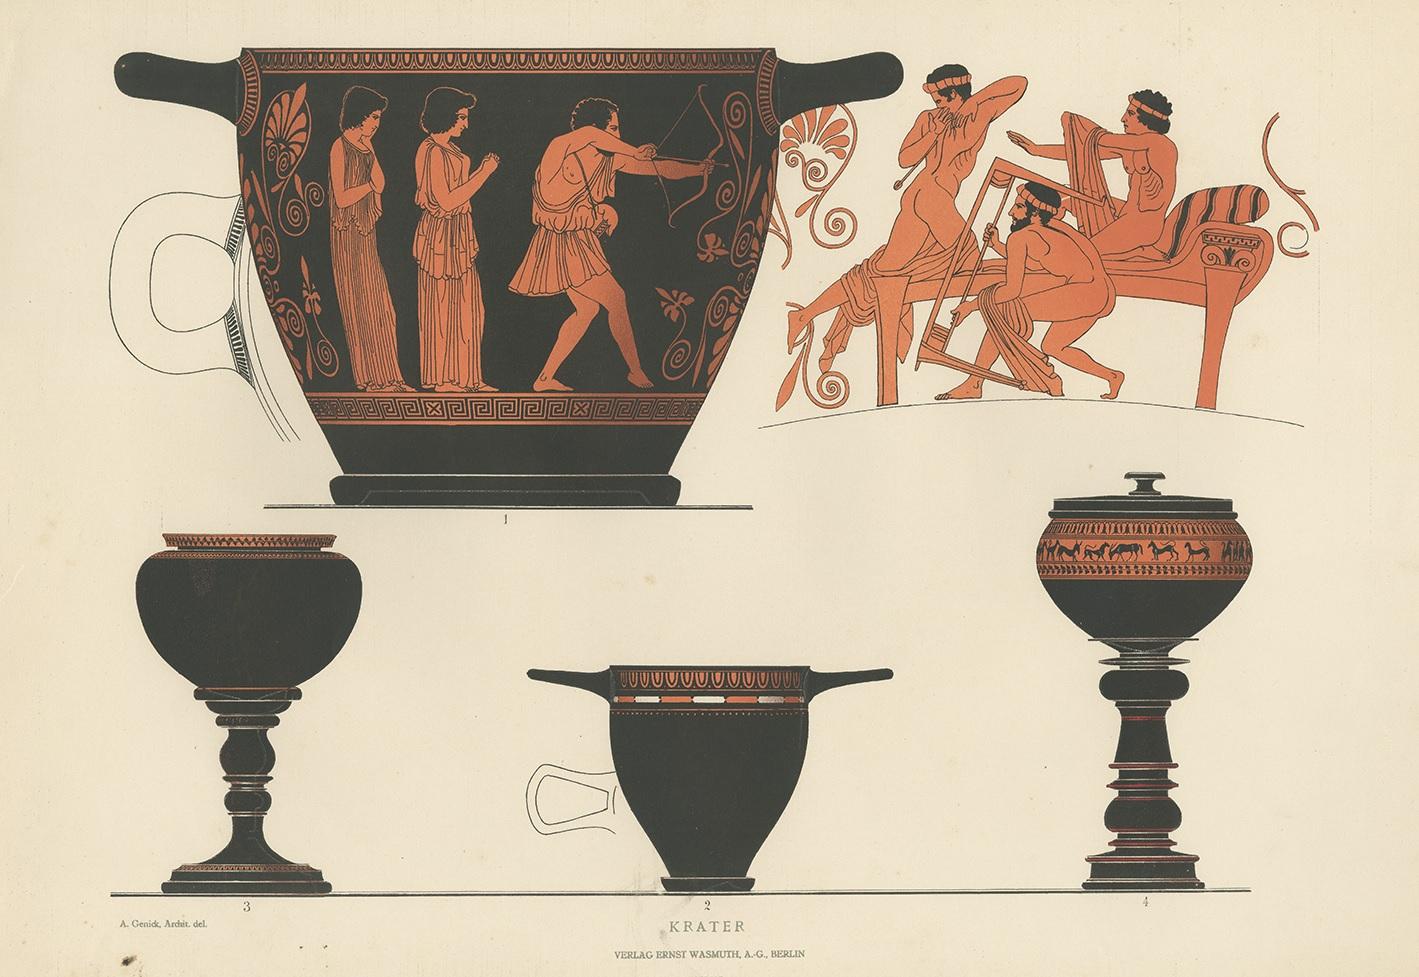 Antique print titled 'Krater'. Color-printed large lithograph by Ernst Wasmuth depicting Greek kraters (ancient vases). This print originates from 'Griechische Keramik' by A. Genick. Albert Genick, an architect by training, was one of the leading